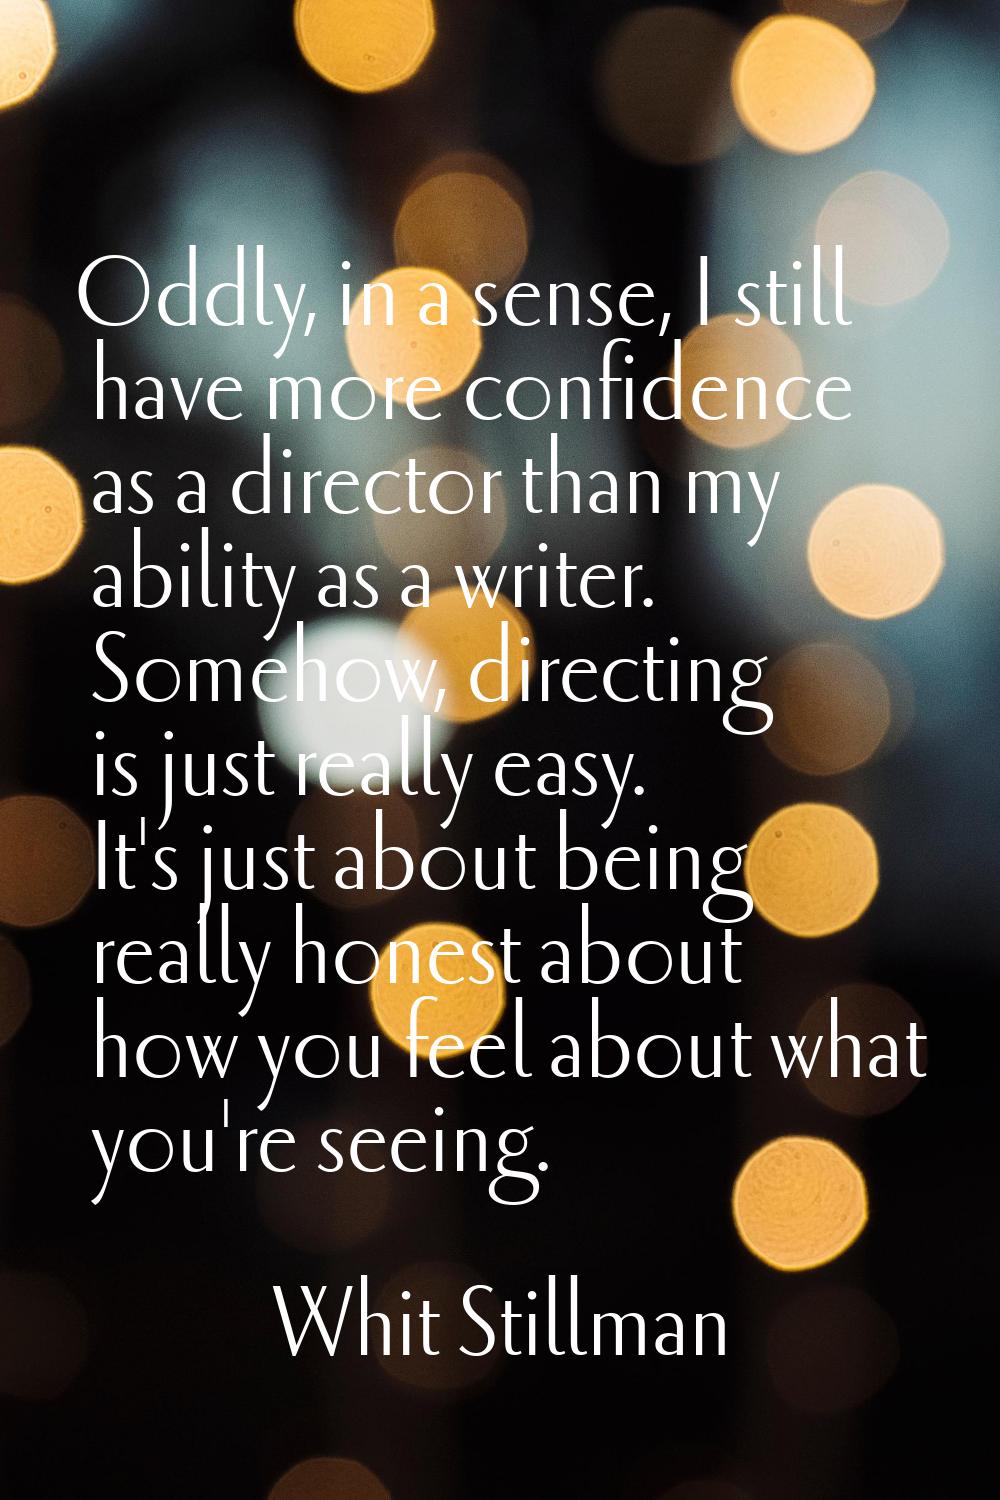 Oddly, in a sense, I still have more confidence as a director than my ability as a writer. Somehow,